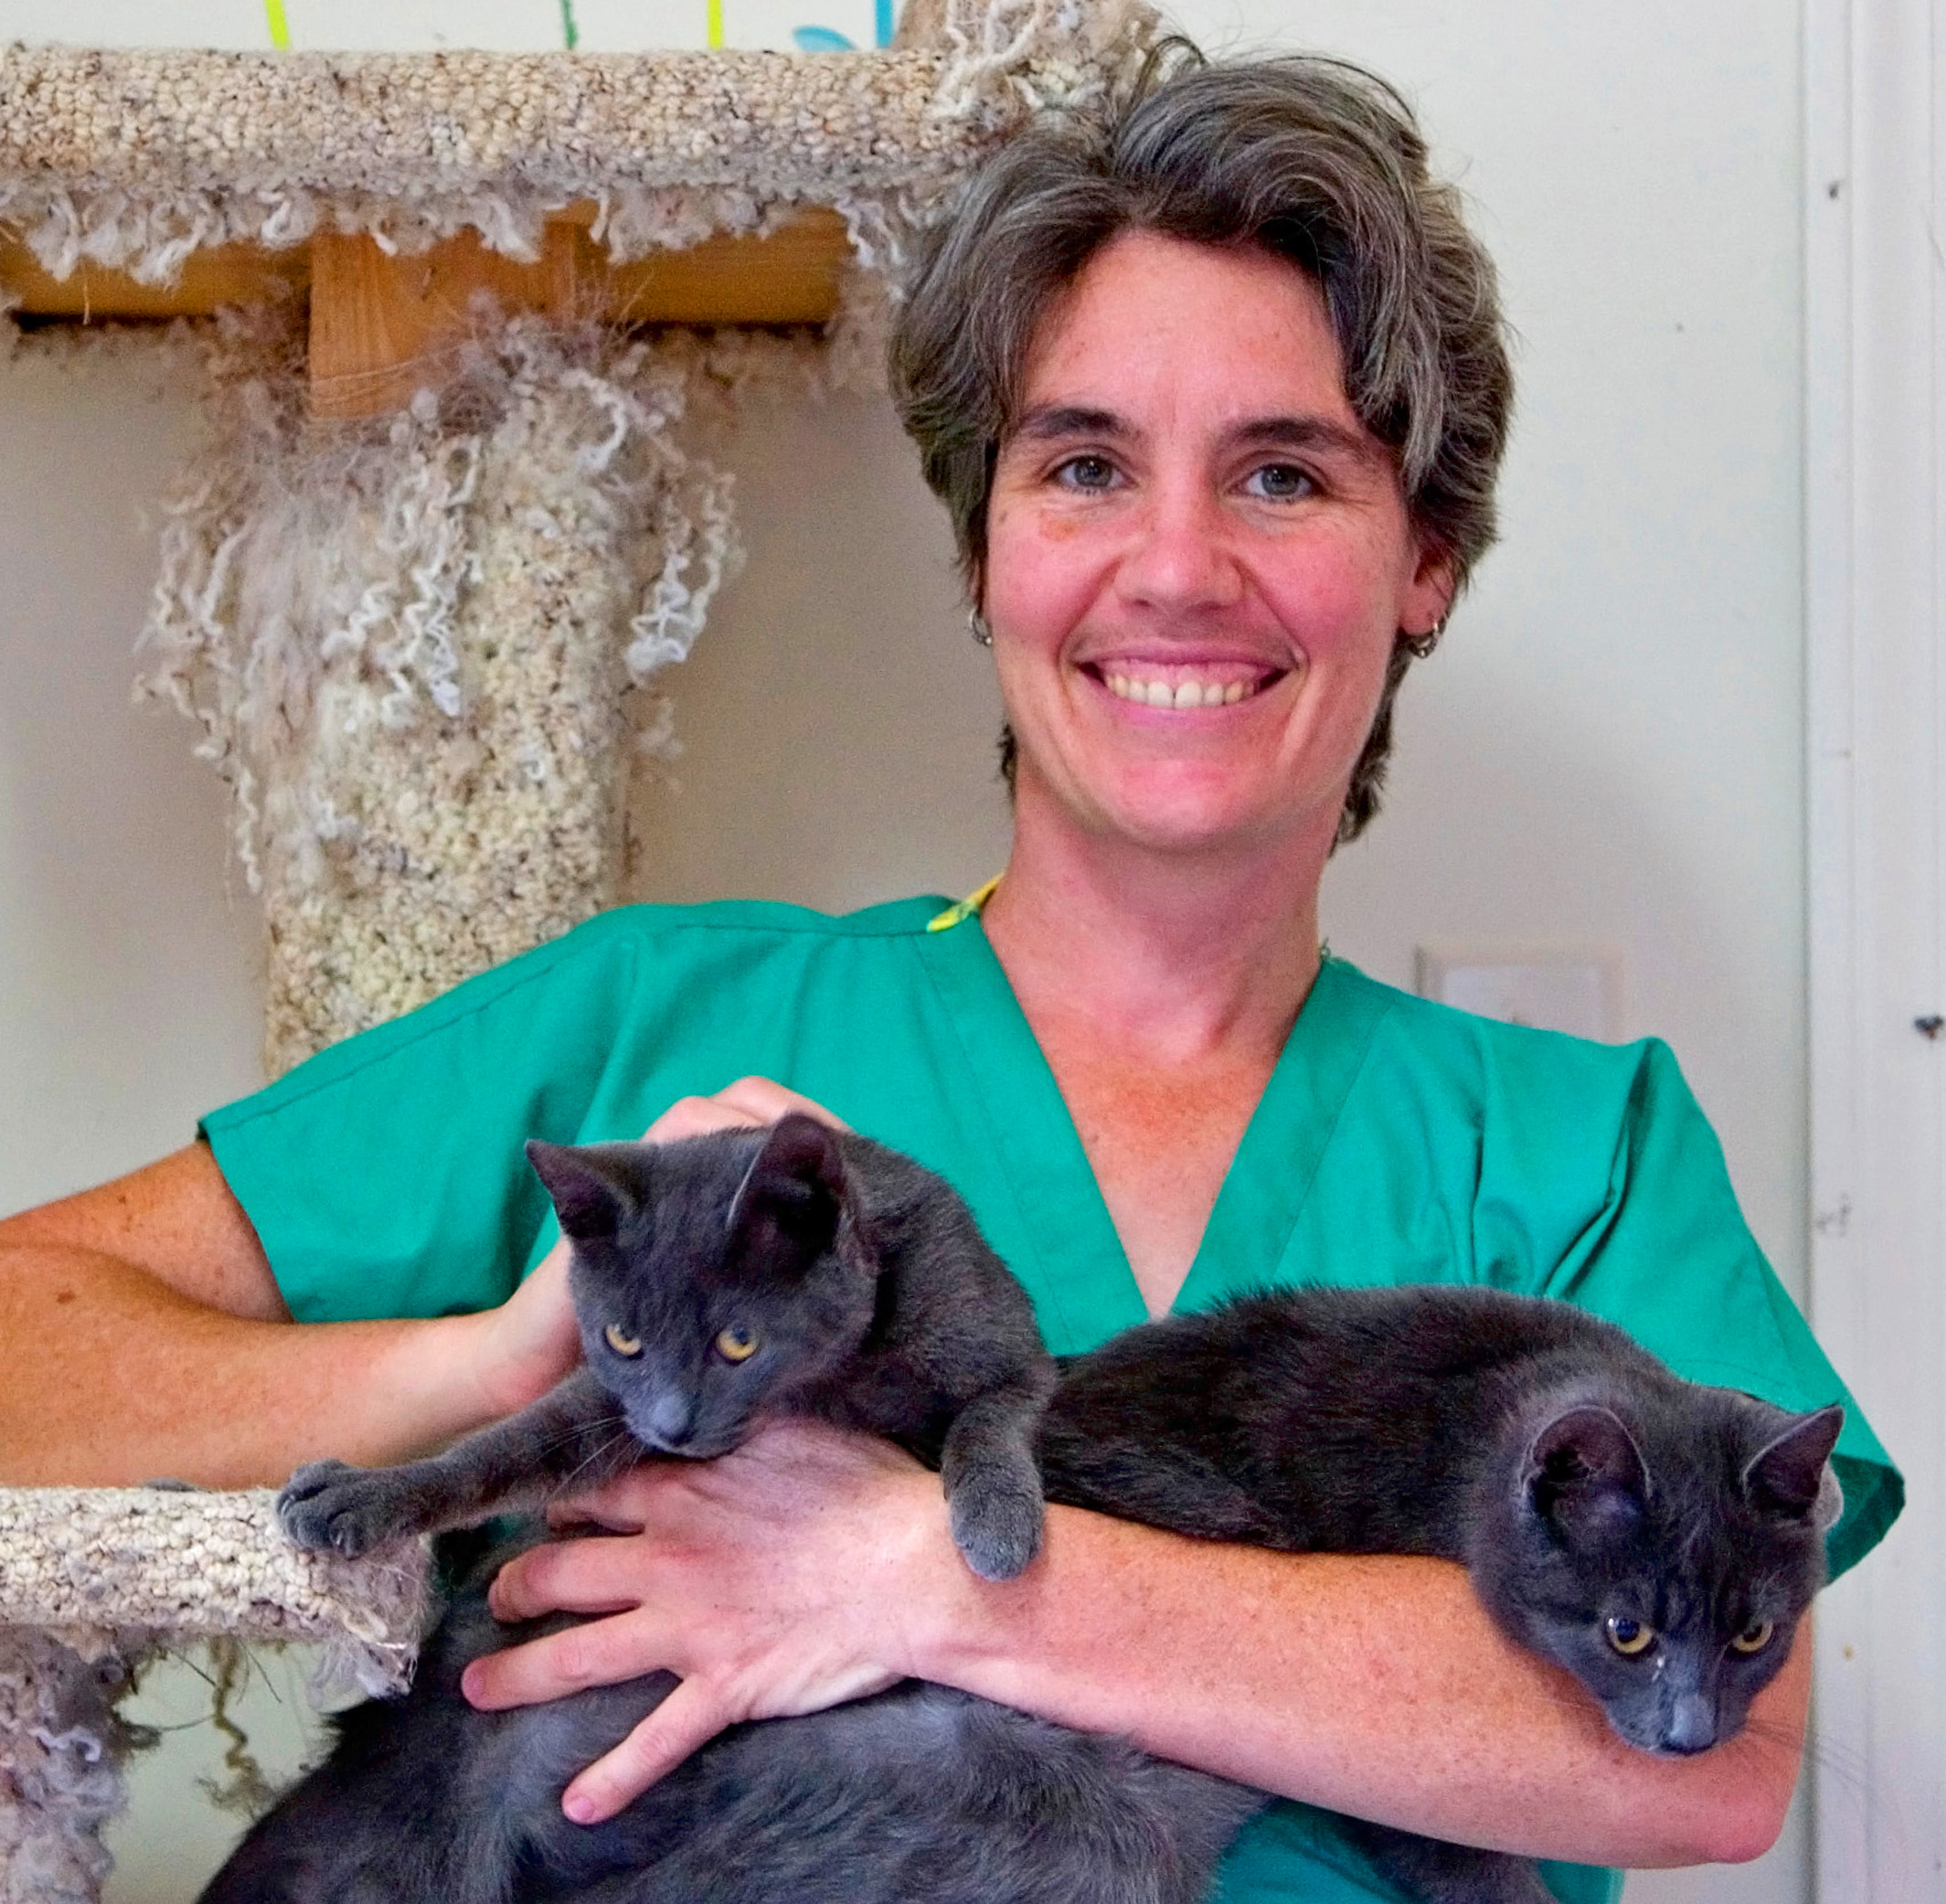 Bio photo of Dr. Sara White, smiling in green scrubs, holding two gray cats